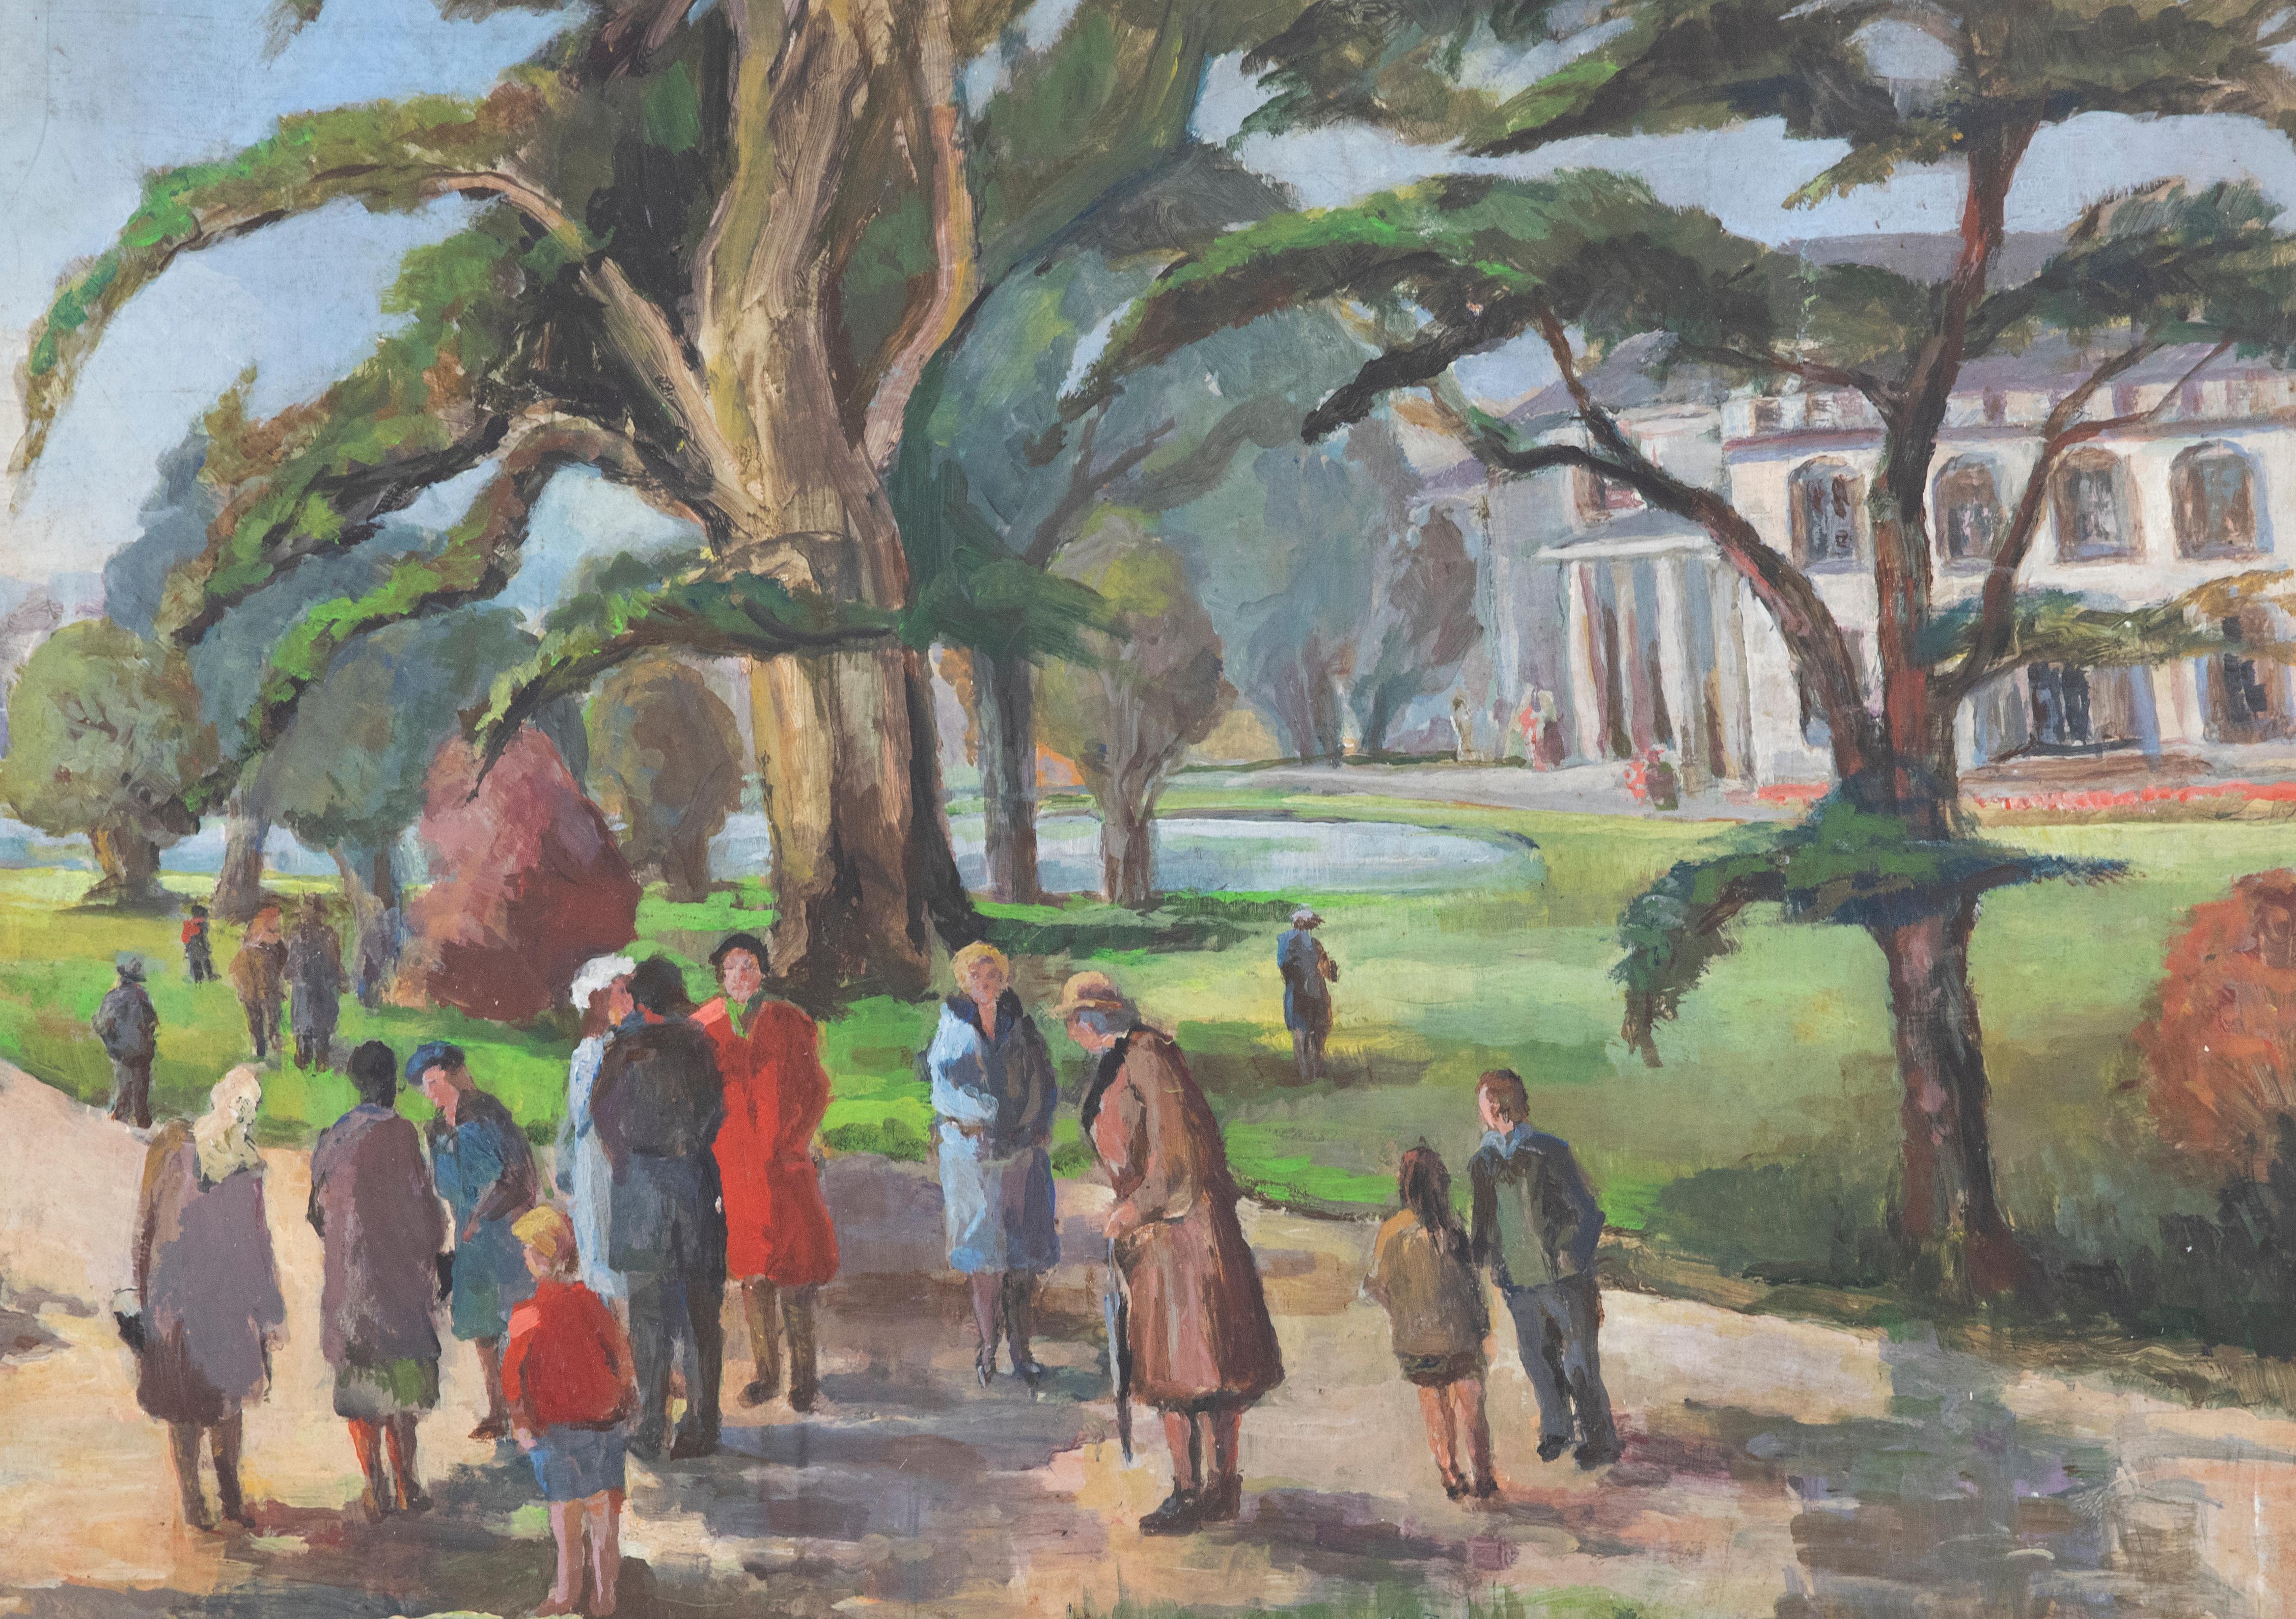 Unknown Landscape Painting - Mid 20th Century Oil - Gathering in the Park